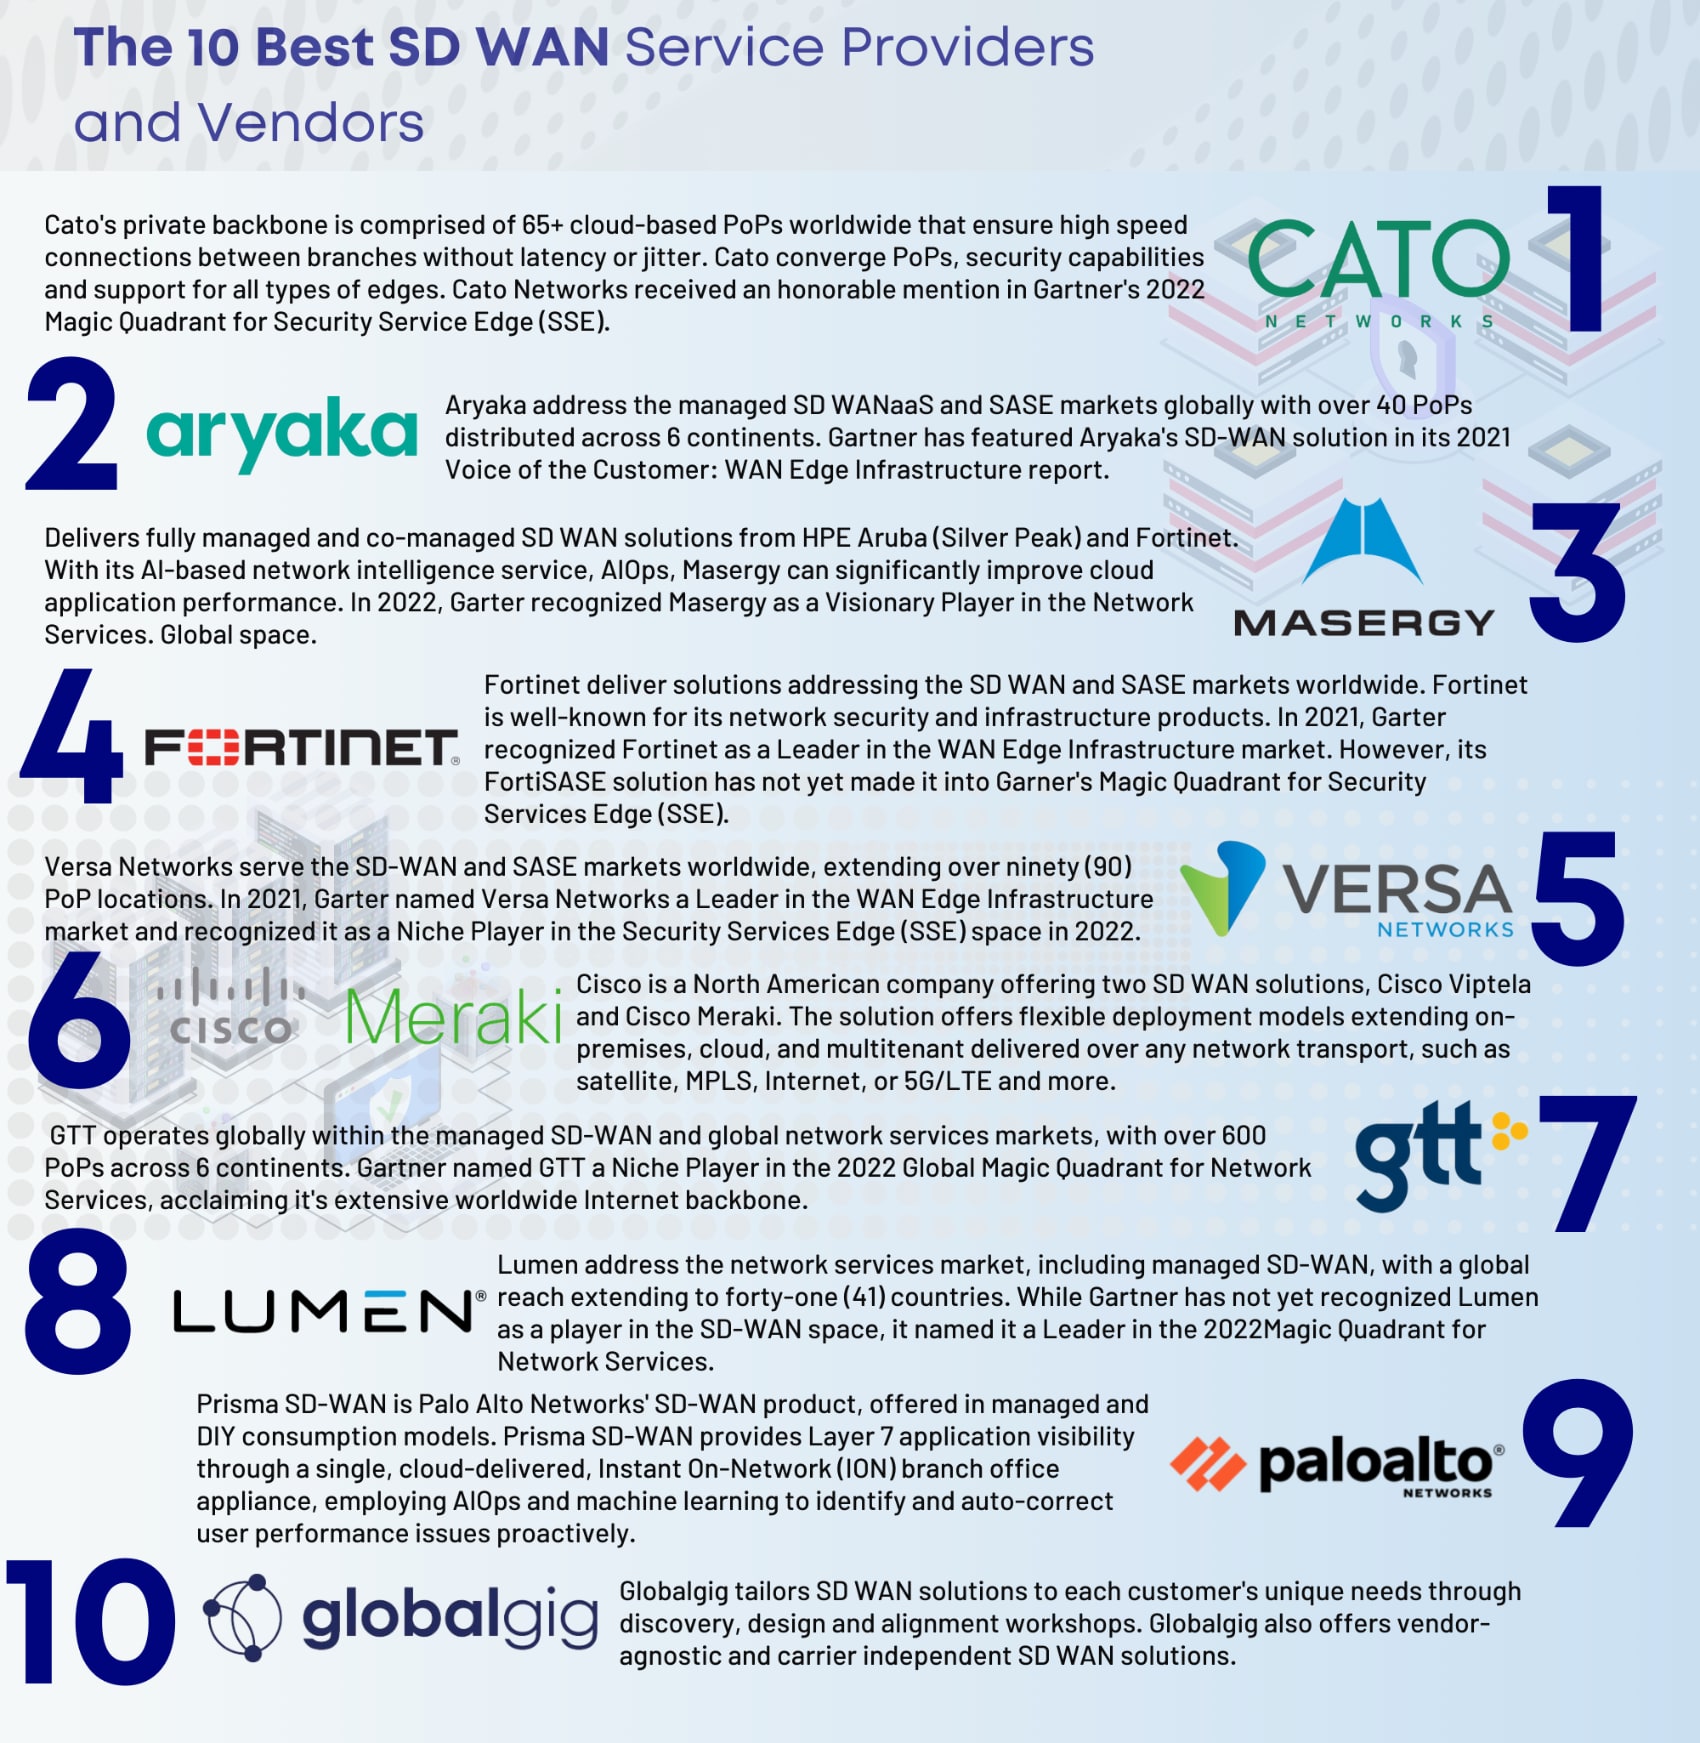 10 Best Global SD WAN Service Providers and Vendors Comparison and List